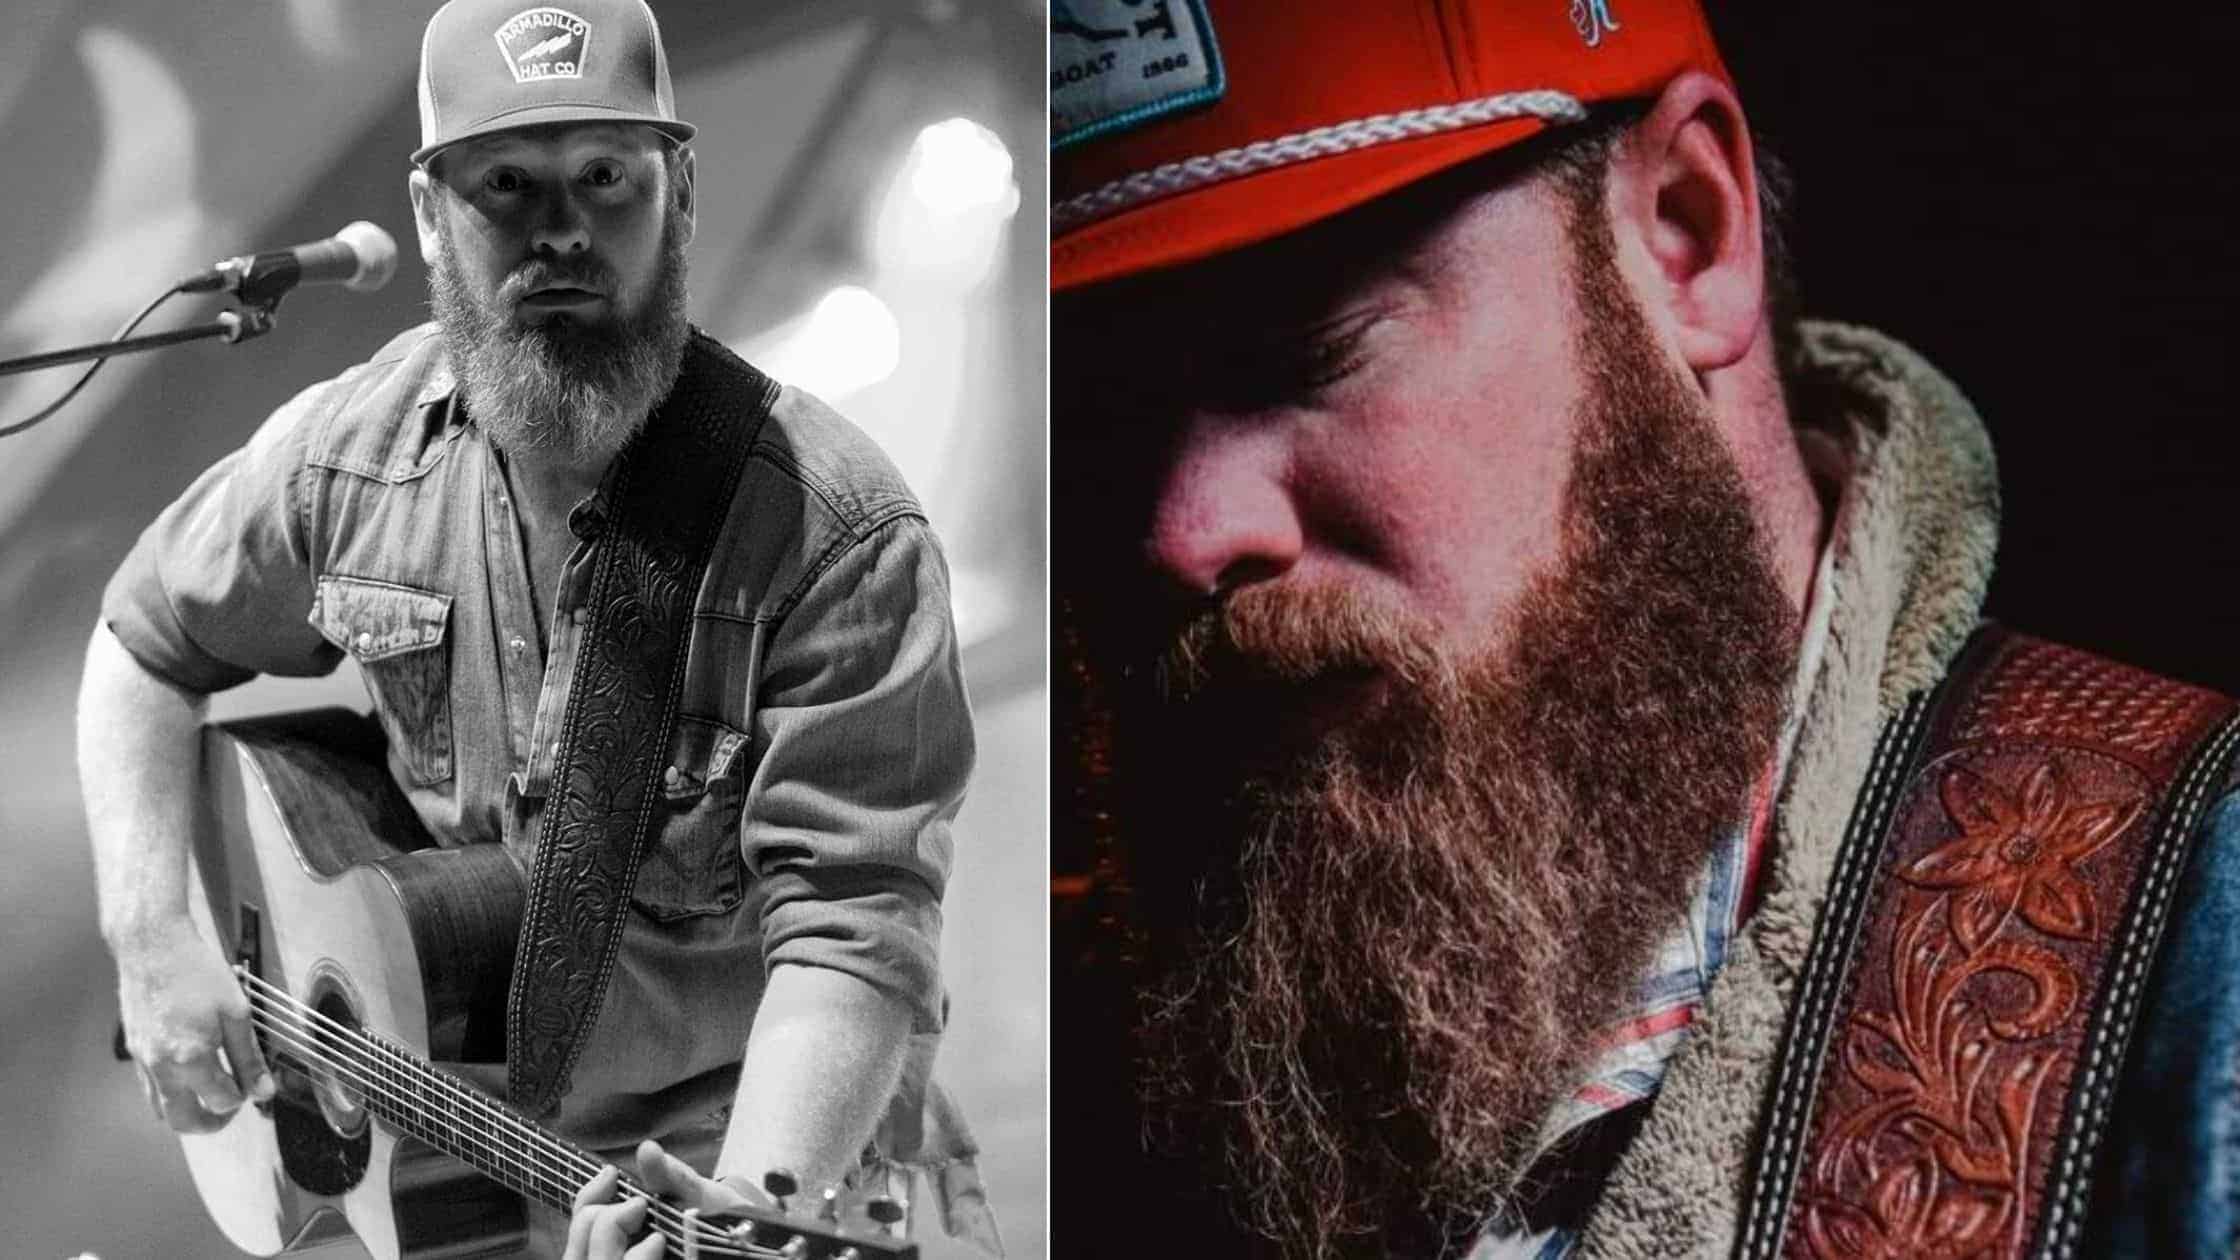 Oklahoma Singer-Songwriter Jake Flint Tragically Dies Just Hours After His Wedding